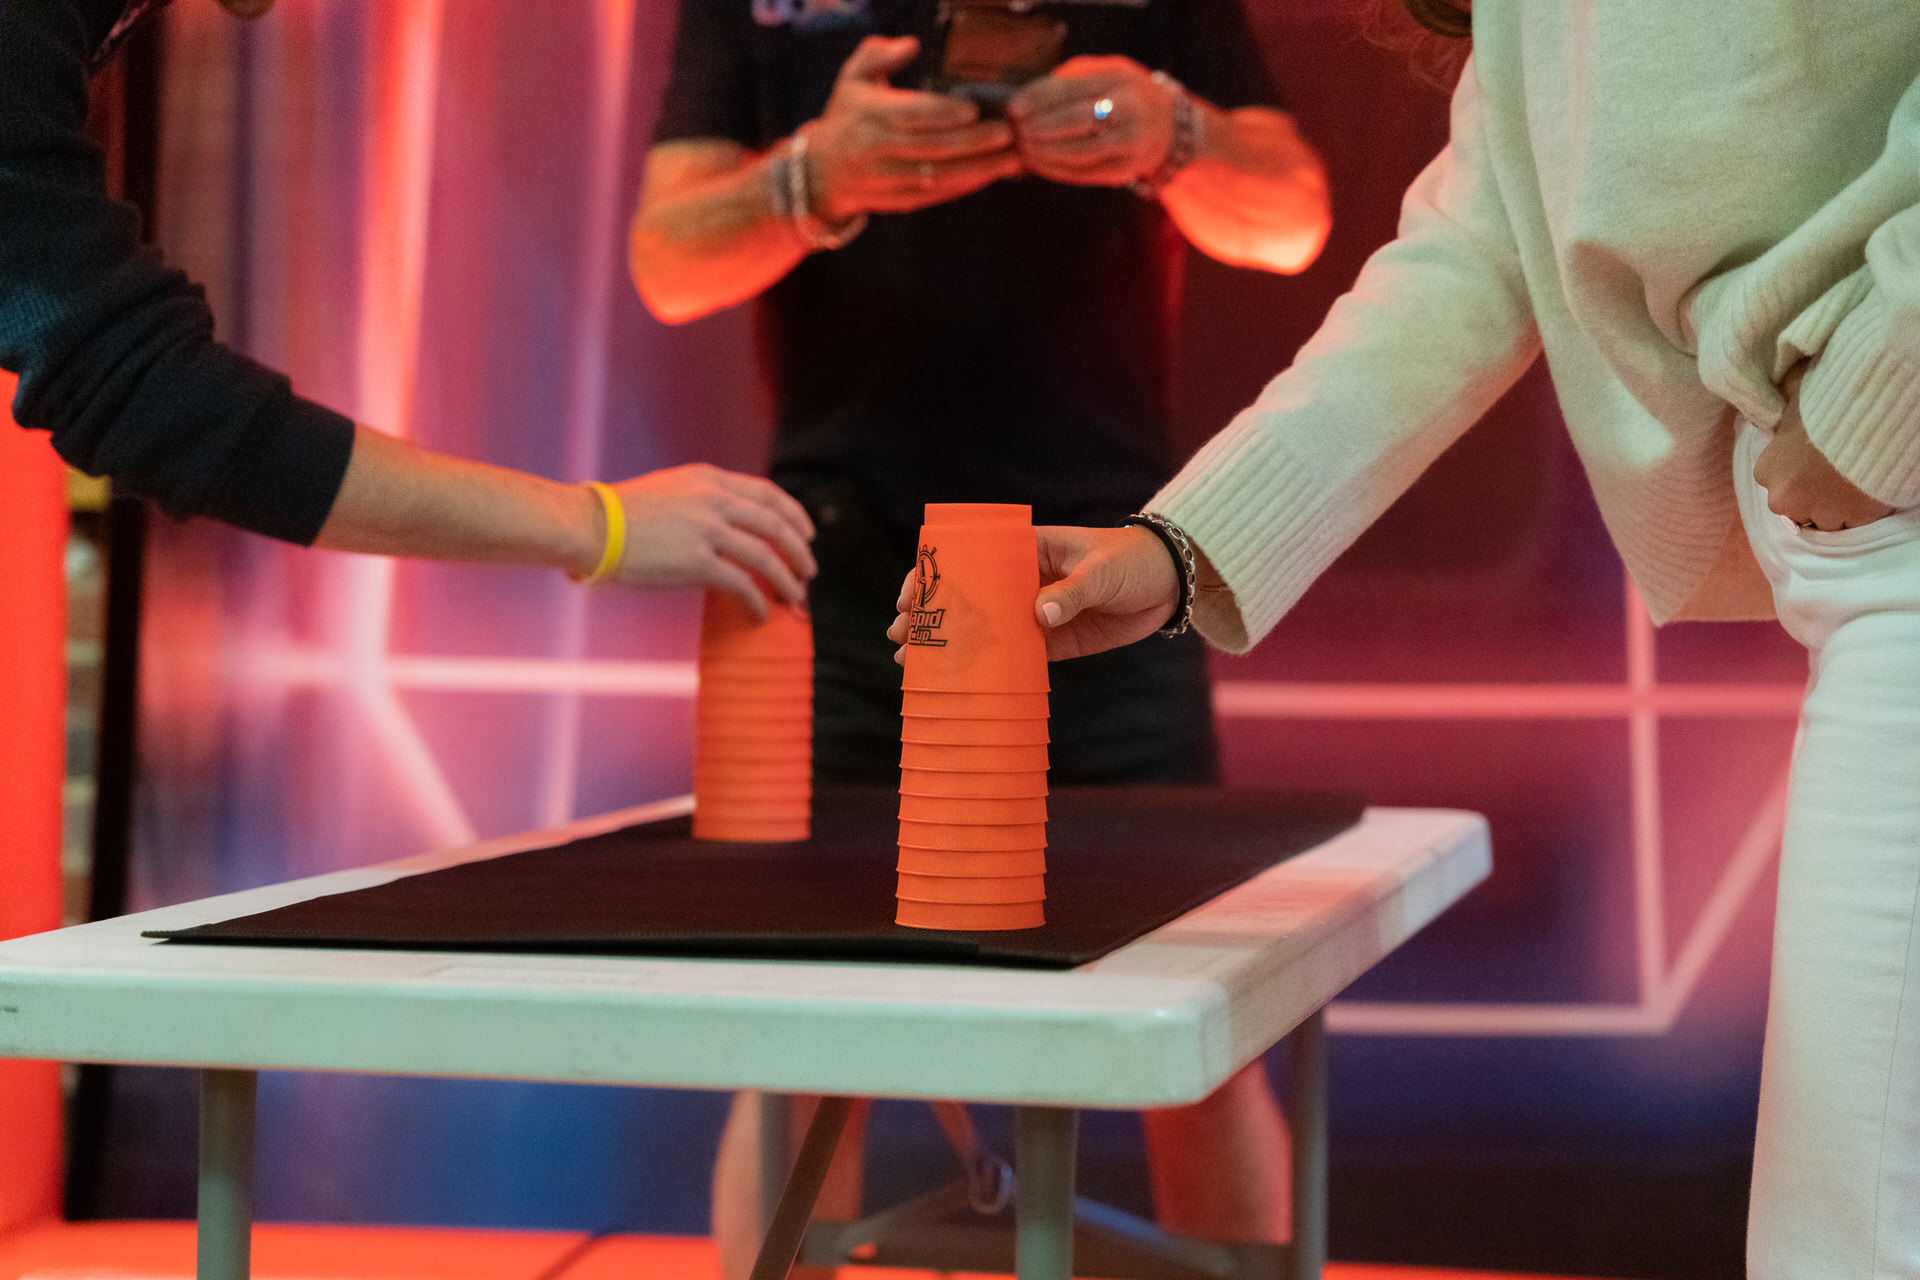 A team stacking cups during an Under Pressure team building game